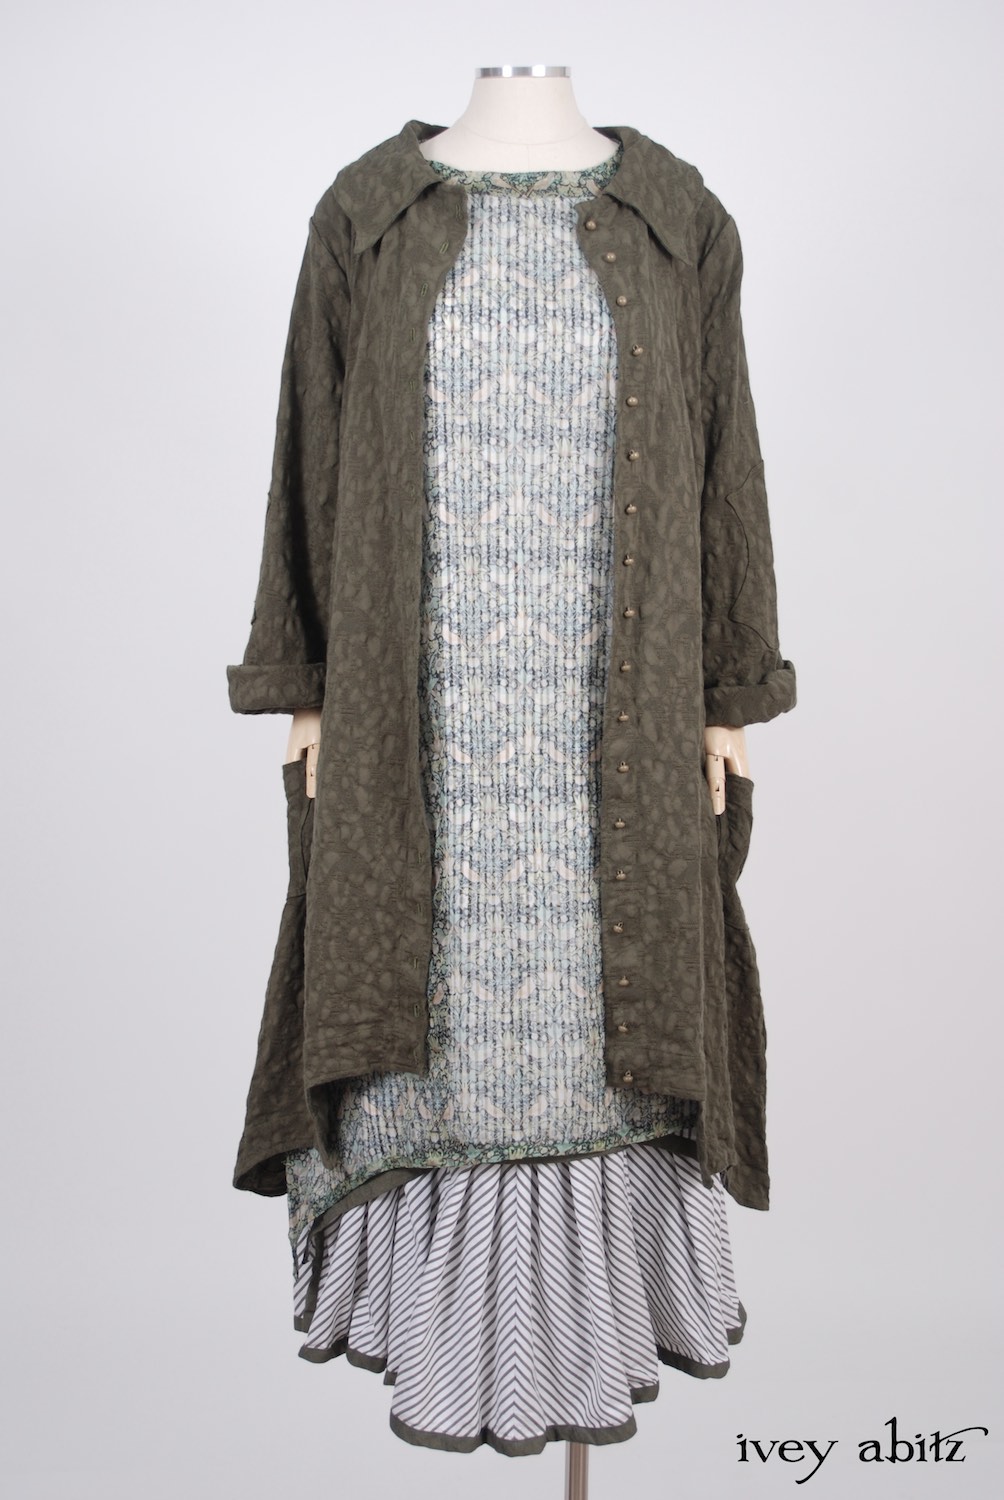 Ivey Abitz - Chittister Duster Coat in Morning Meadow Hemstitch Jacquard  - Wildefield Frock in Bird and Vine Silk Organza  - Limited Edition Striped Blanchefleur Frock in Morning Meadow Striped Cotton, High Water Length